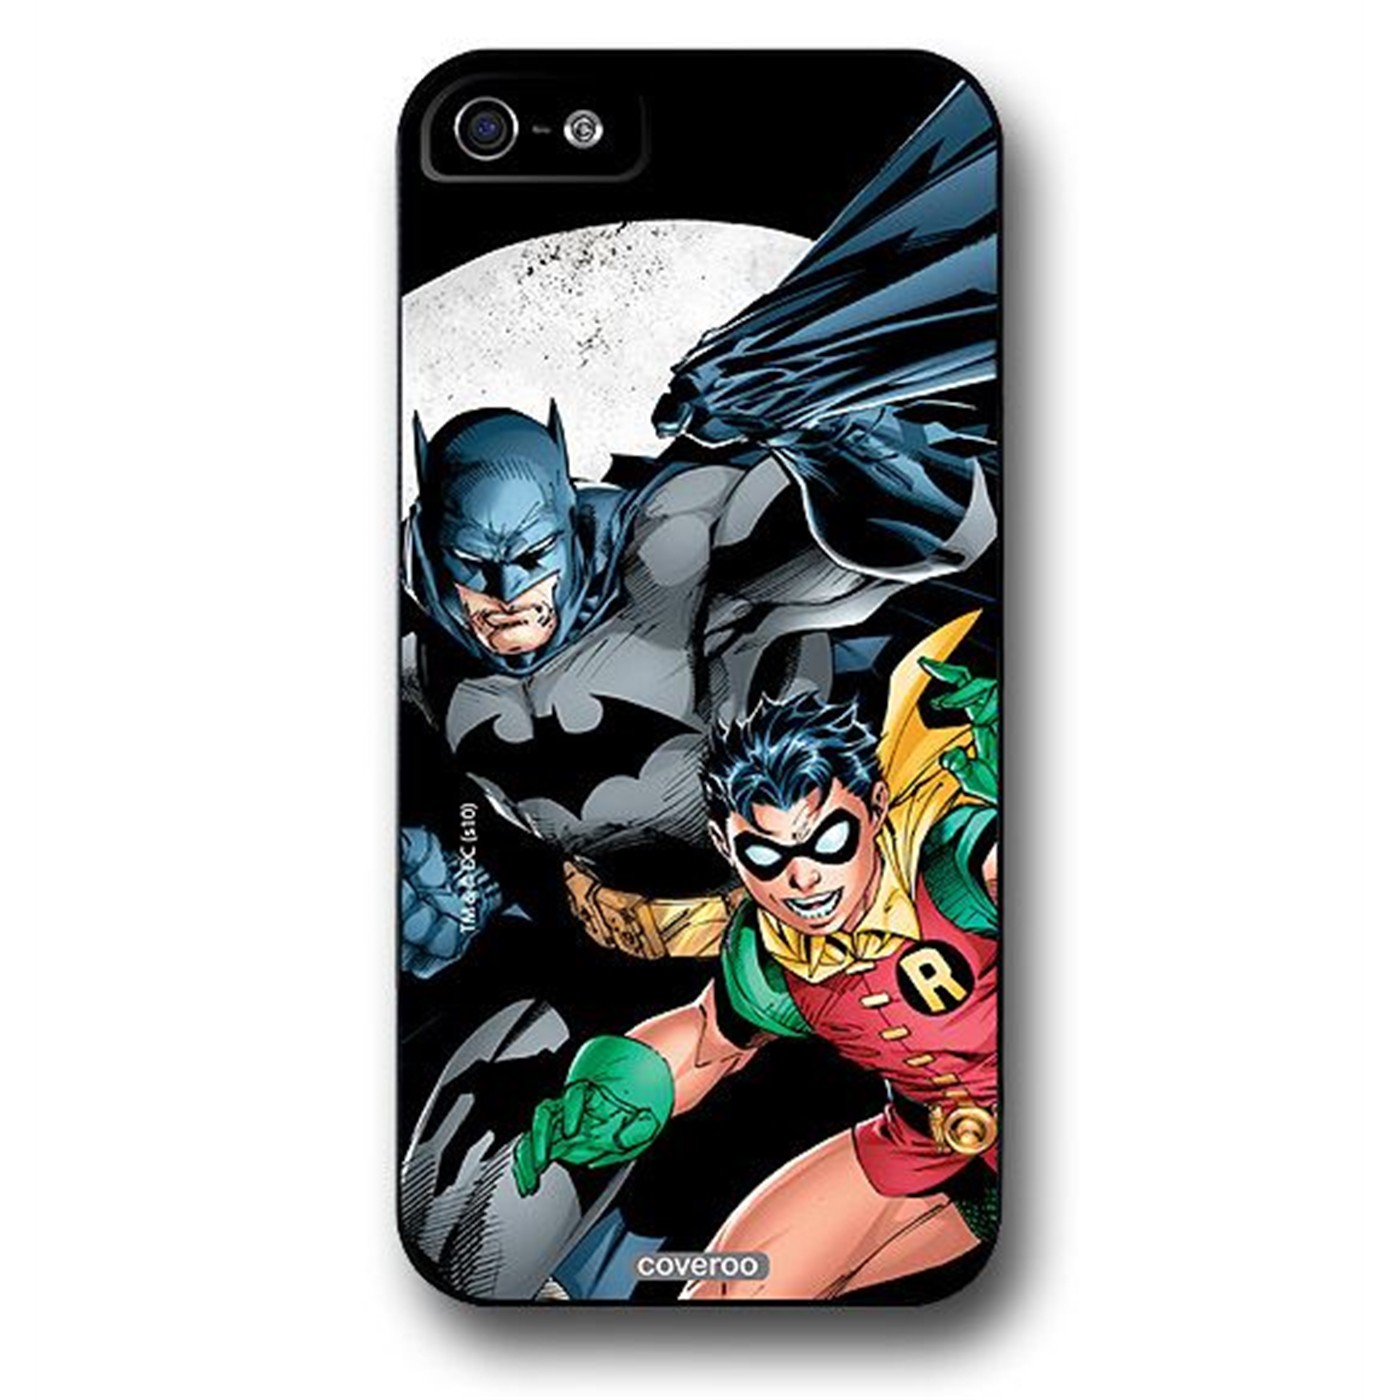 Batman and Robin All-Star iPhone 5 Snap Case